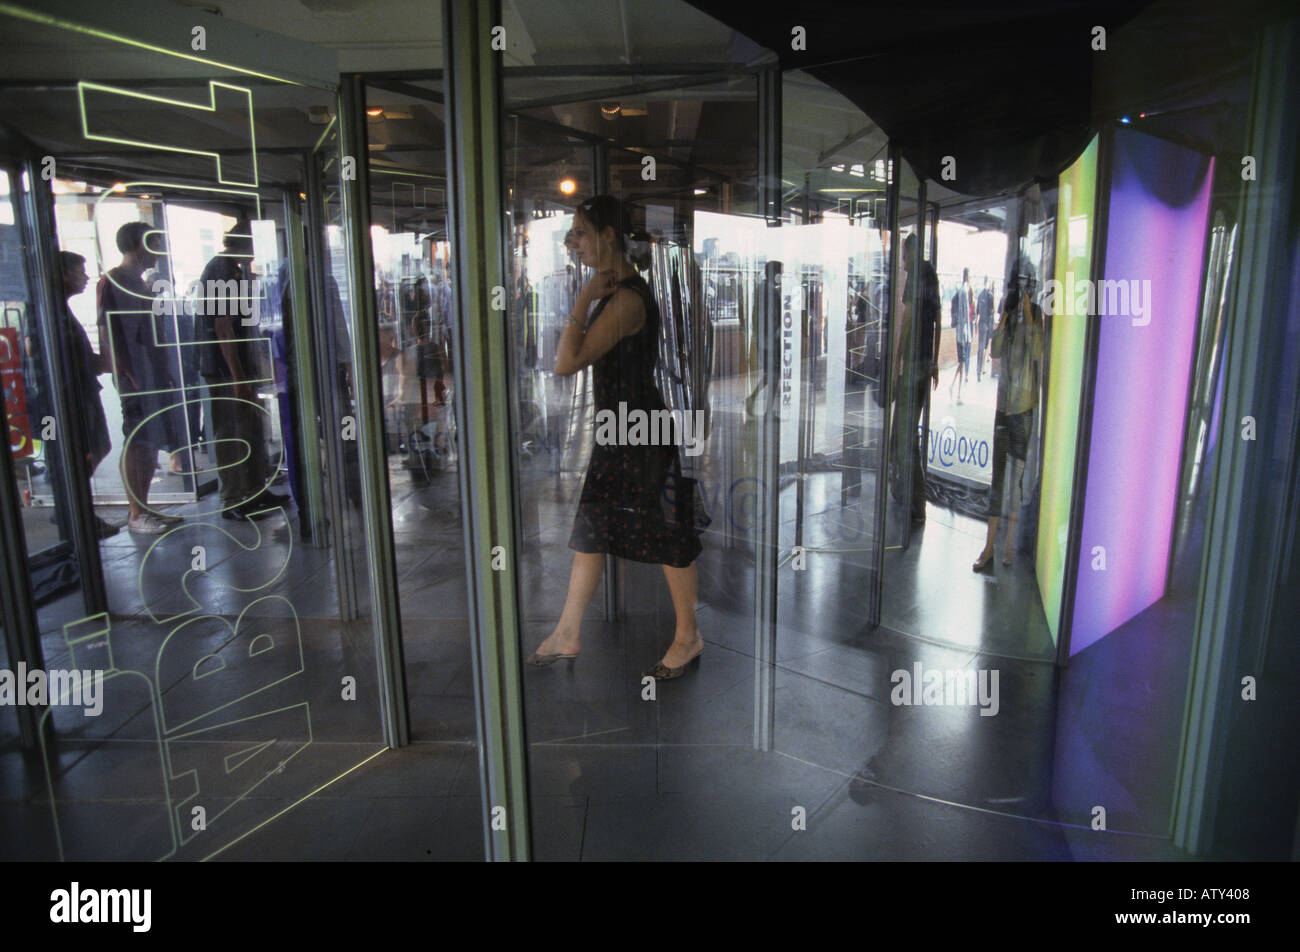 woman at entrance to exhibition, South Bank, London England, UK Stock Photo